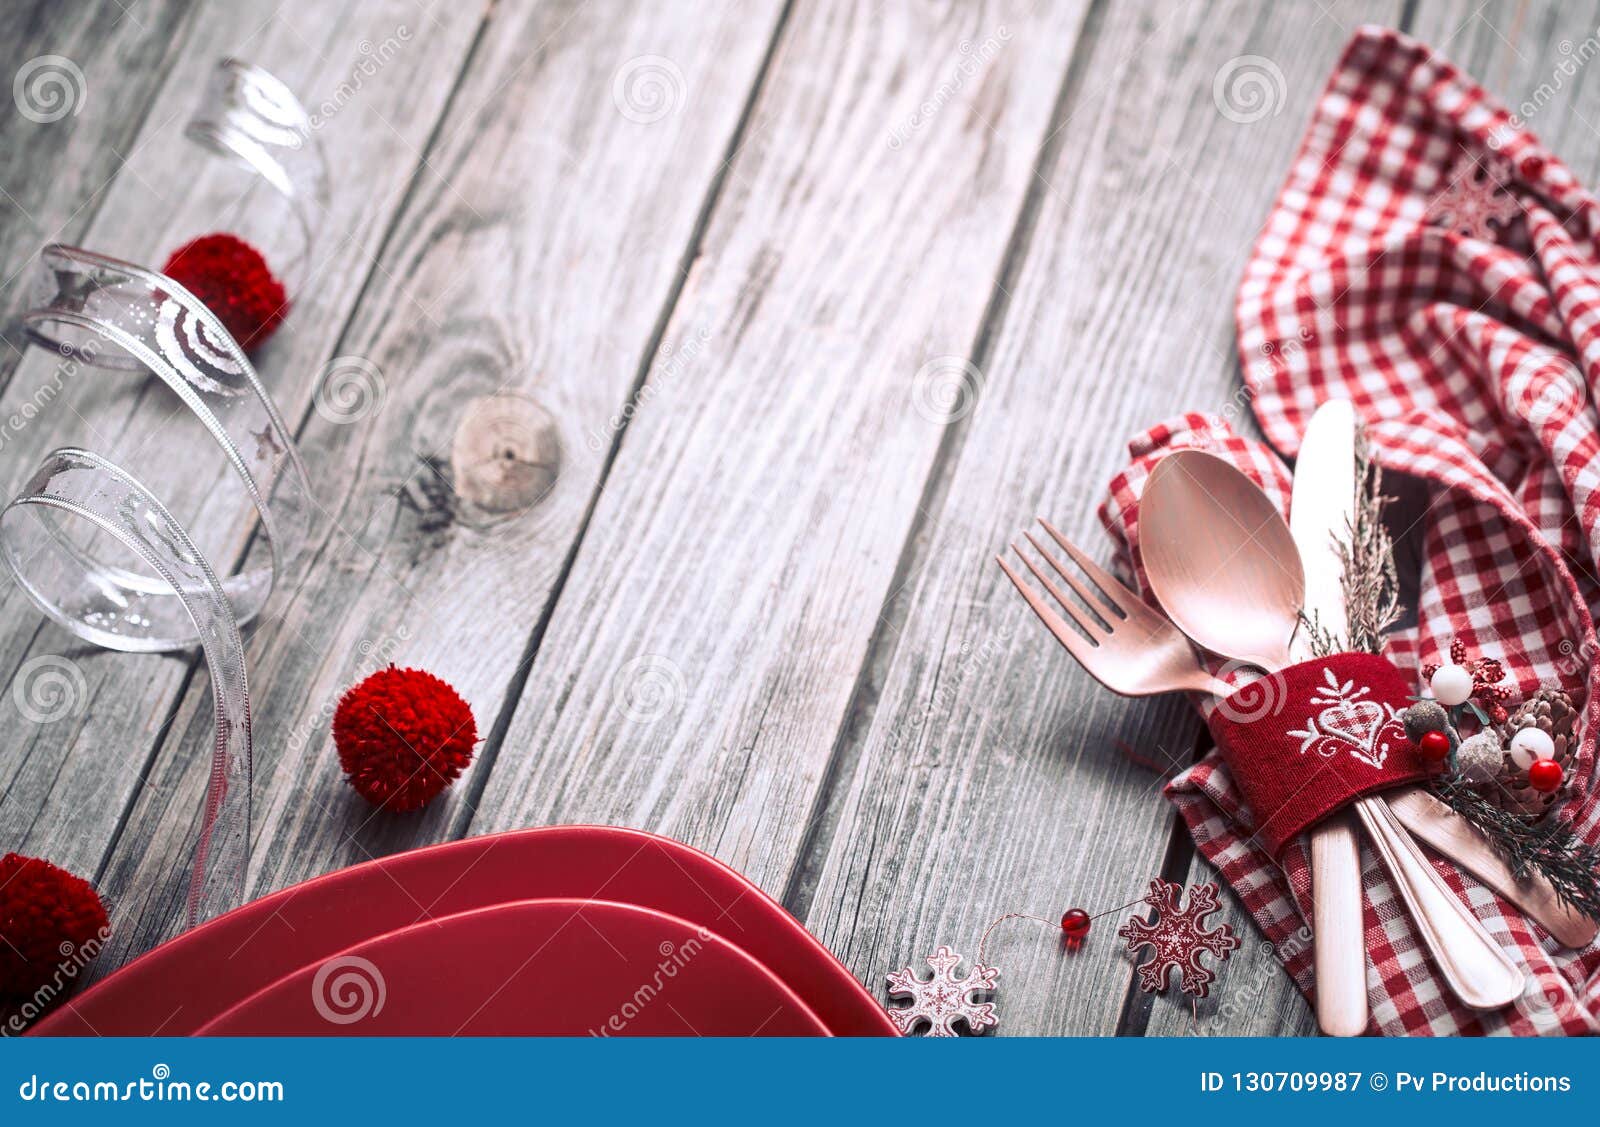 Christmas Dinner Cutlery with Decor on a Wooden Background Stock Image ...